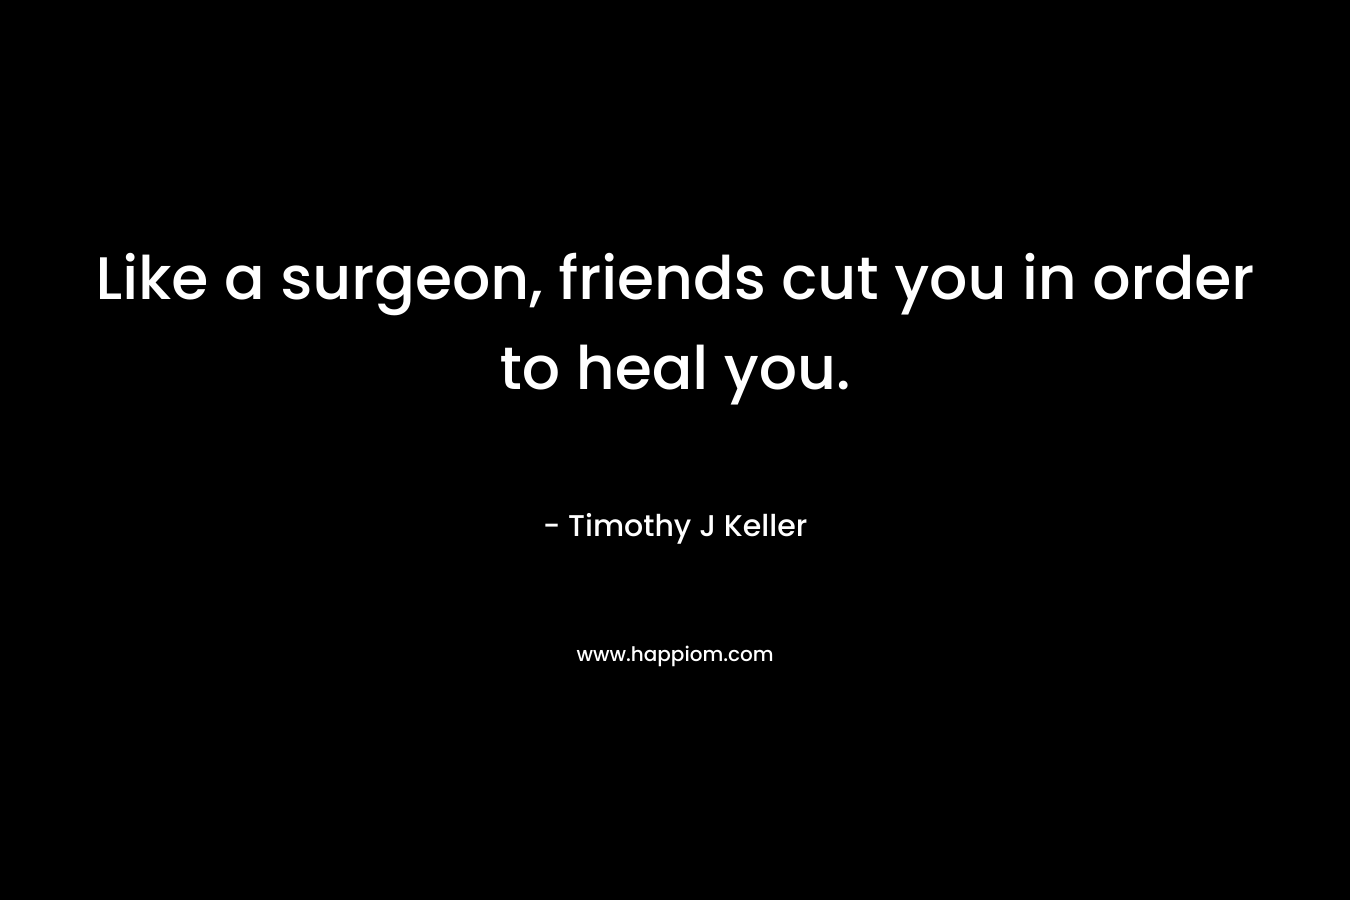 Like a surgeon, friends cut you in order to heal you.